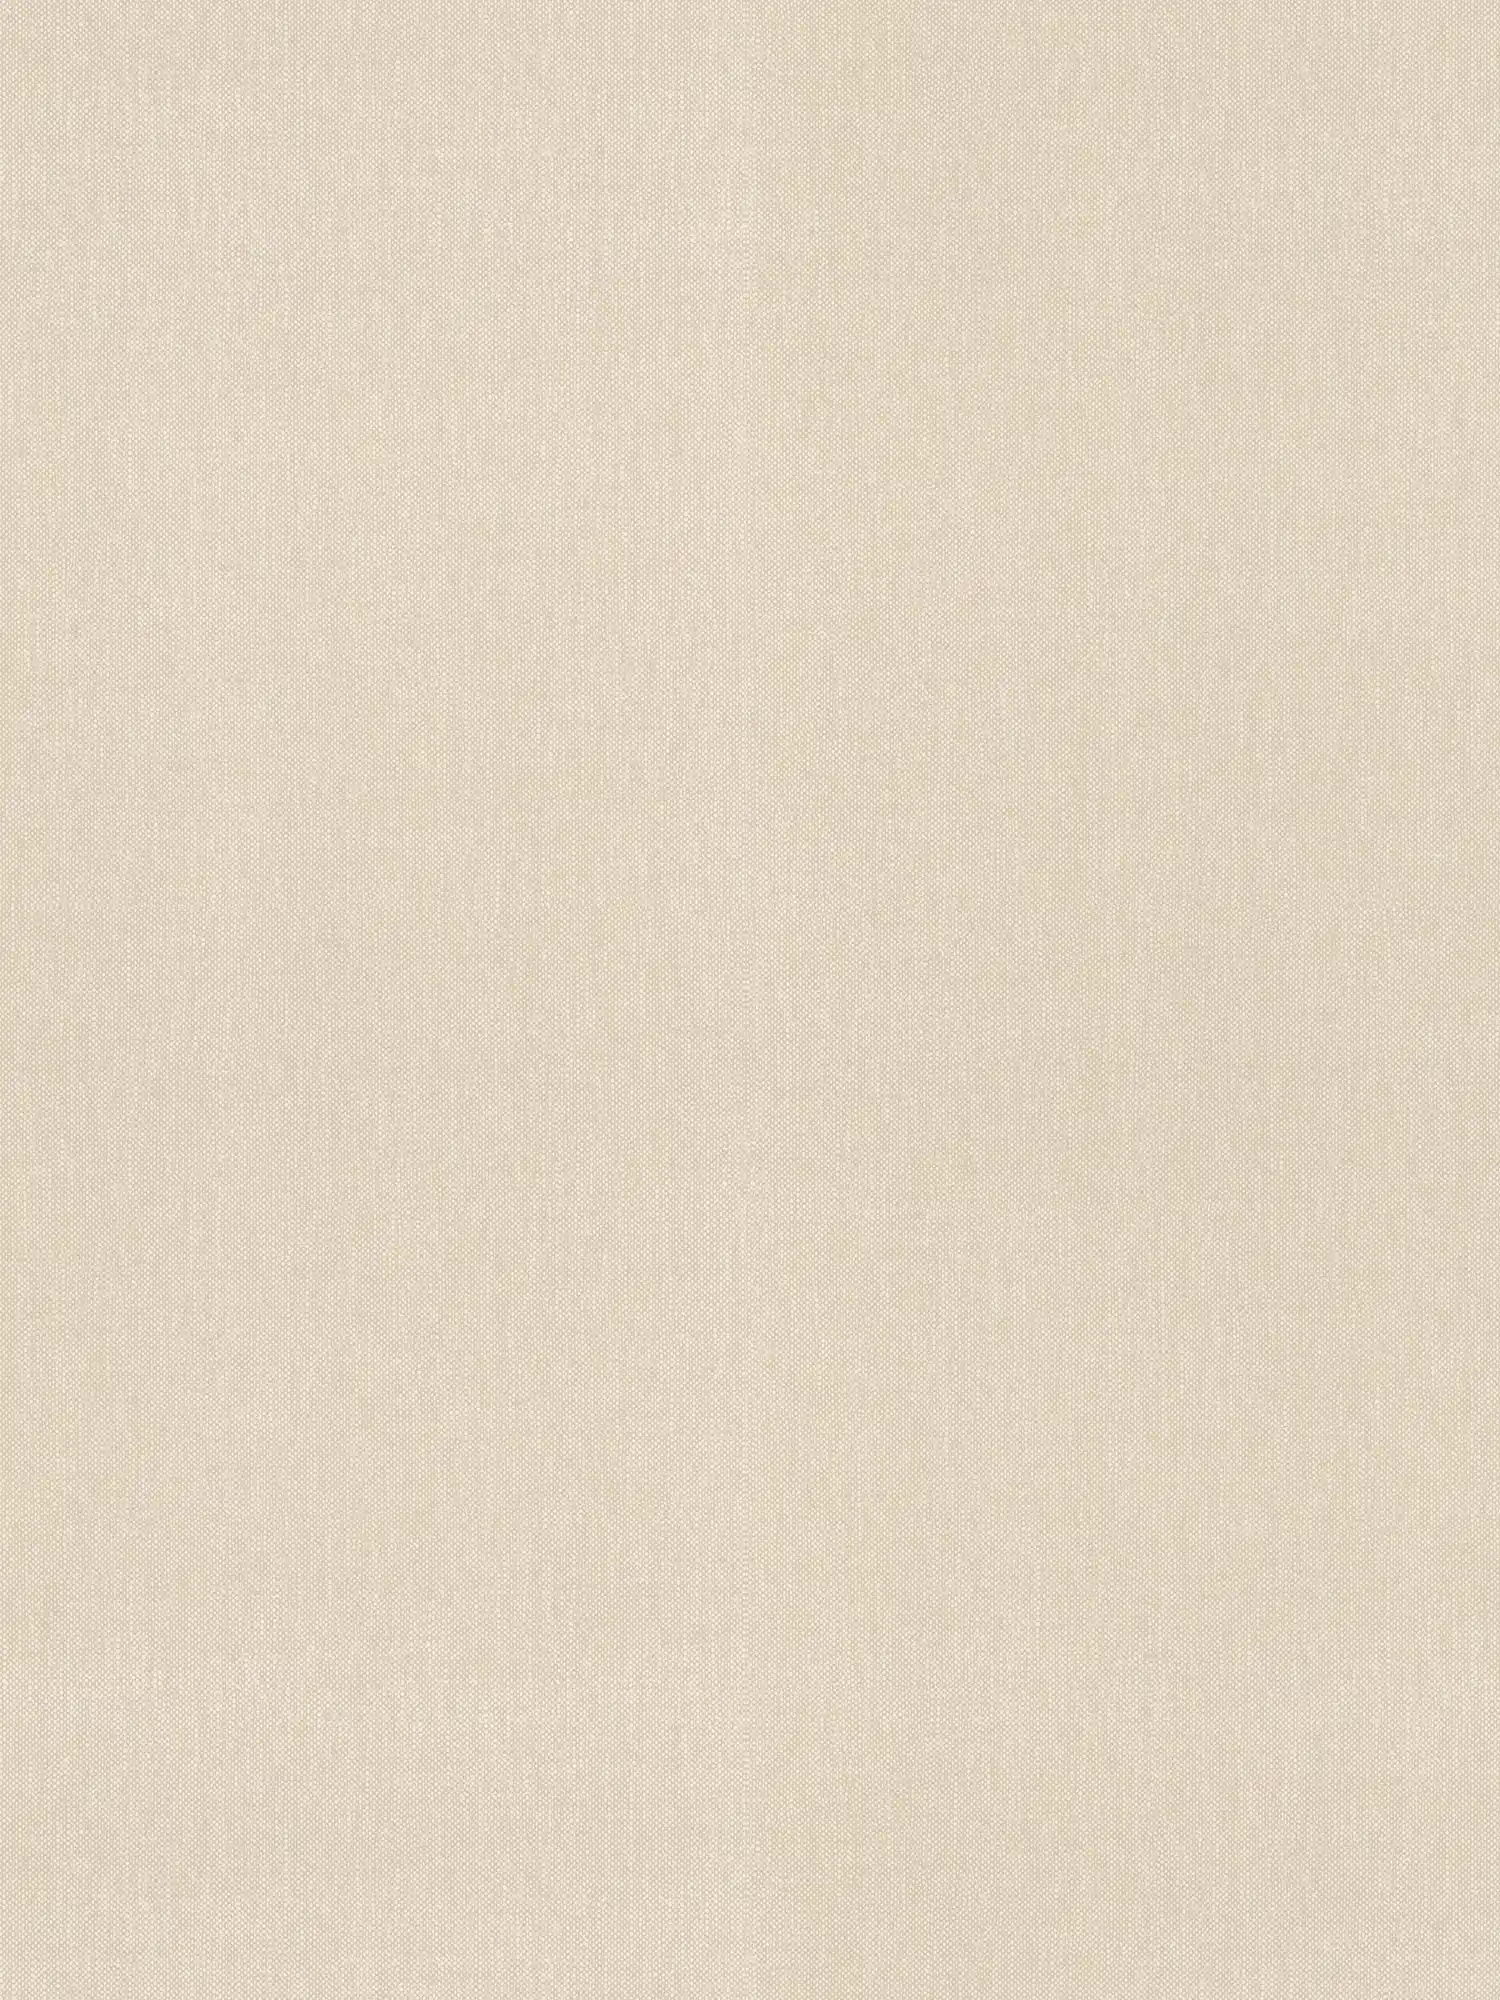 Plain wallpaper beige with textile structure in country style
